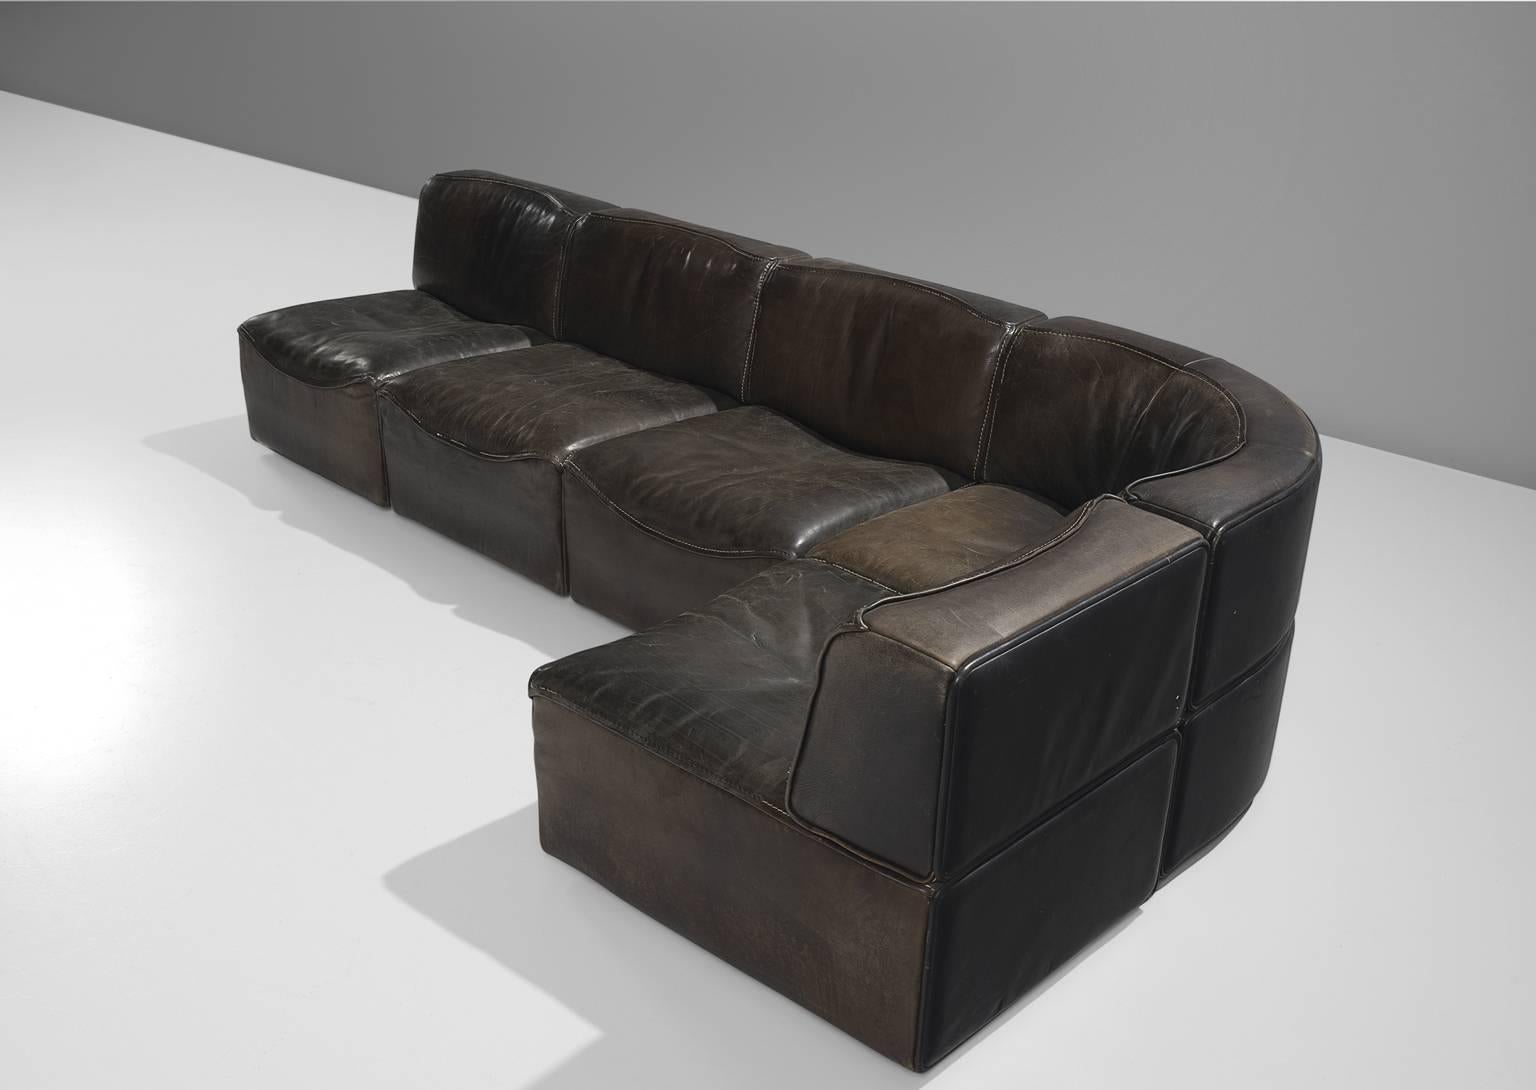 Sectional sofa model DS-15, 5 elements, in leather by De Sede, Switzerland, 1970s. 

This sectional sofa contains one corner element and four normal elements. The section make it possible to arrange this sofa to your own wishes. The design is